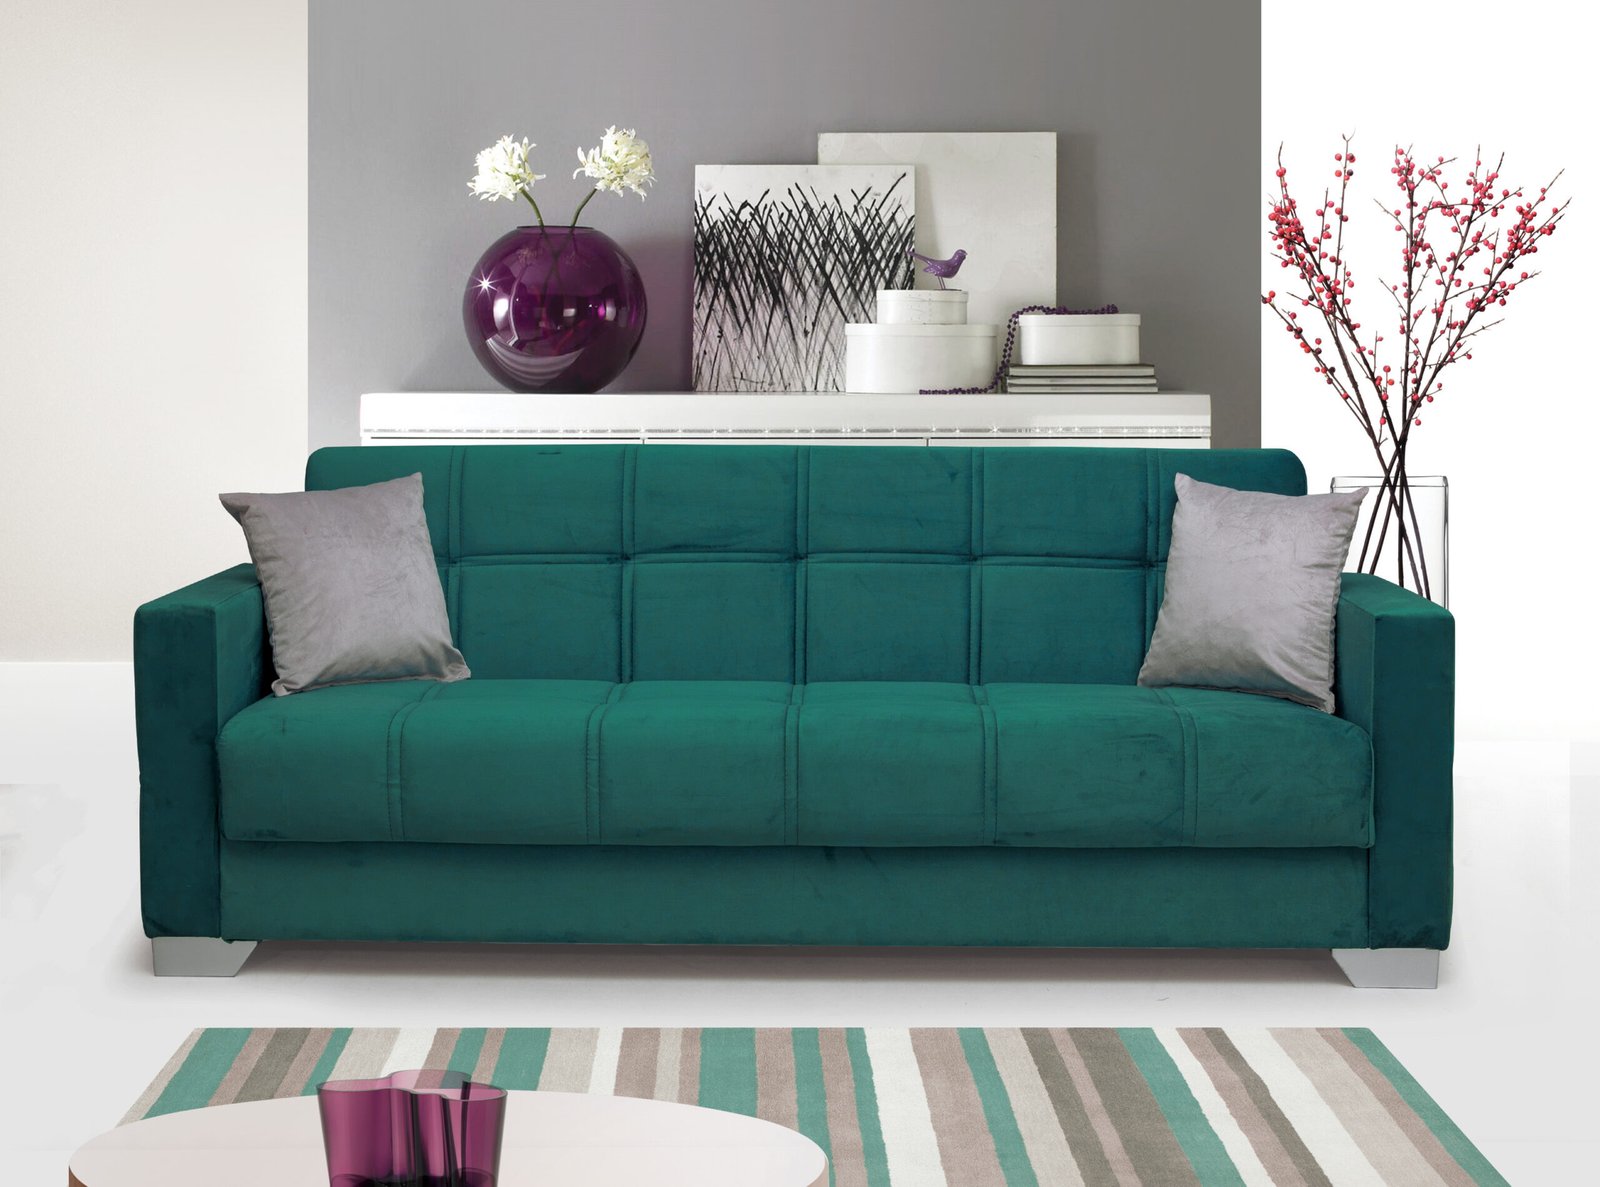 Montreal Emerald Green Plush Velvet Sofa Bed with Grey Pillows